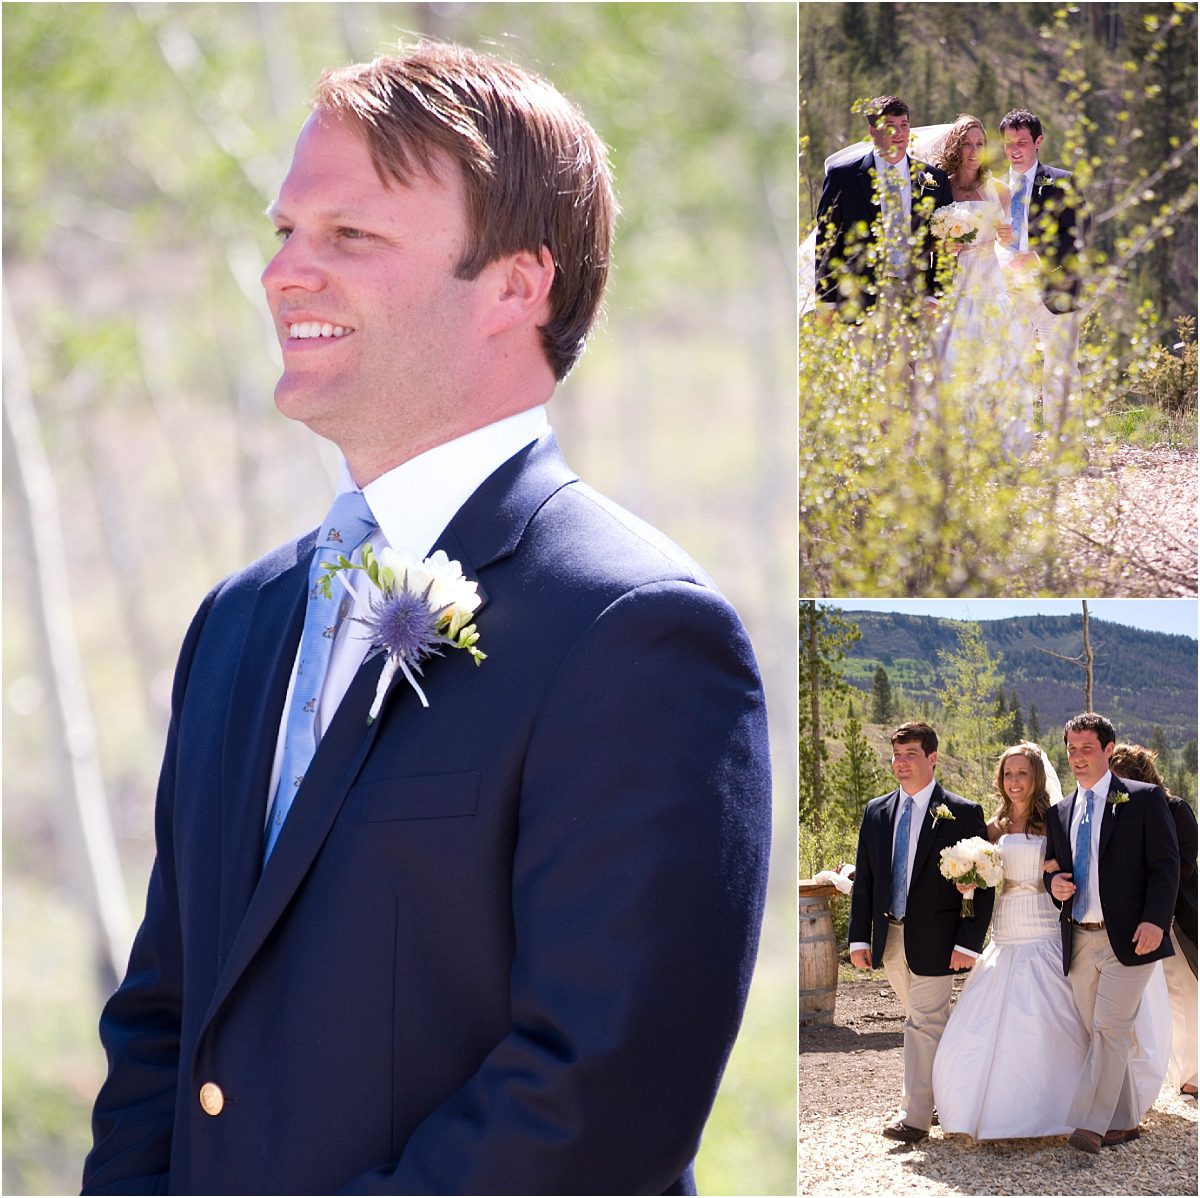 precessional, father of the bride walking bride down the aisle, navy tuxes, groom sees bride for the first time,outdoor ceremony at Woodsie, C Lazy U Ranch Wedding, Granby, Colorado Wedding Photographer, Mountain Wedding Photography